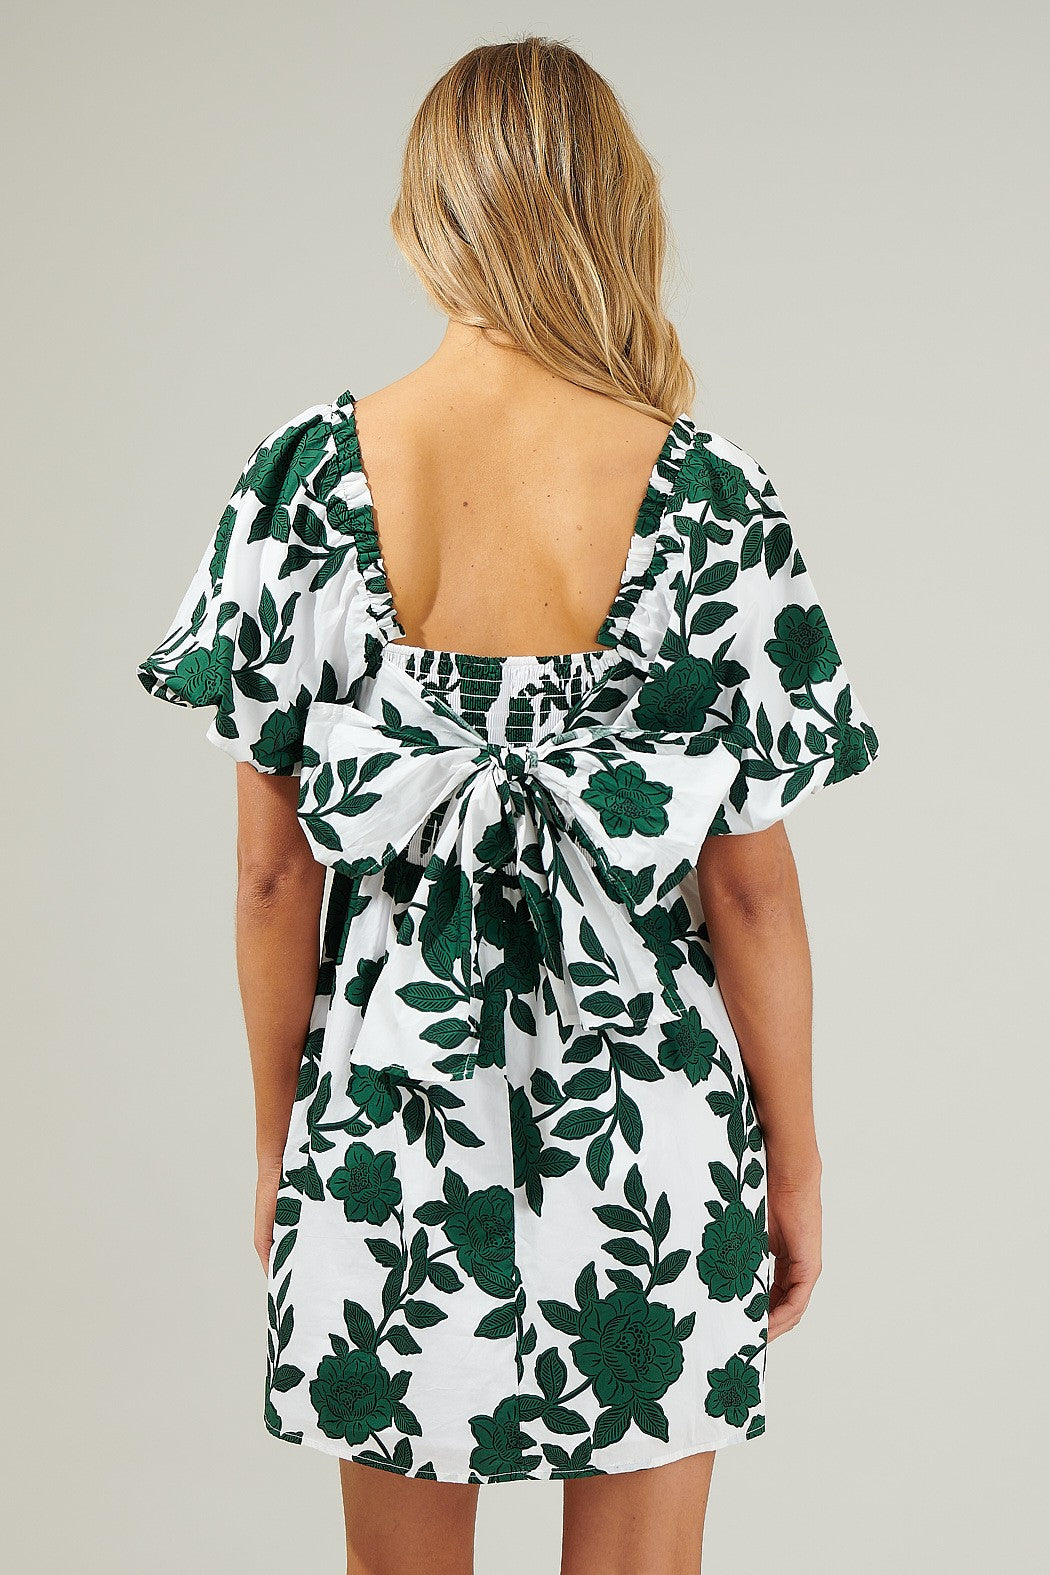 GREEN WITH FLORAL ENVY DRESS